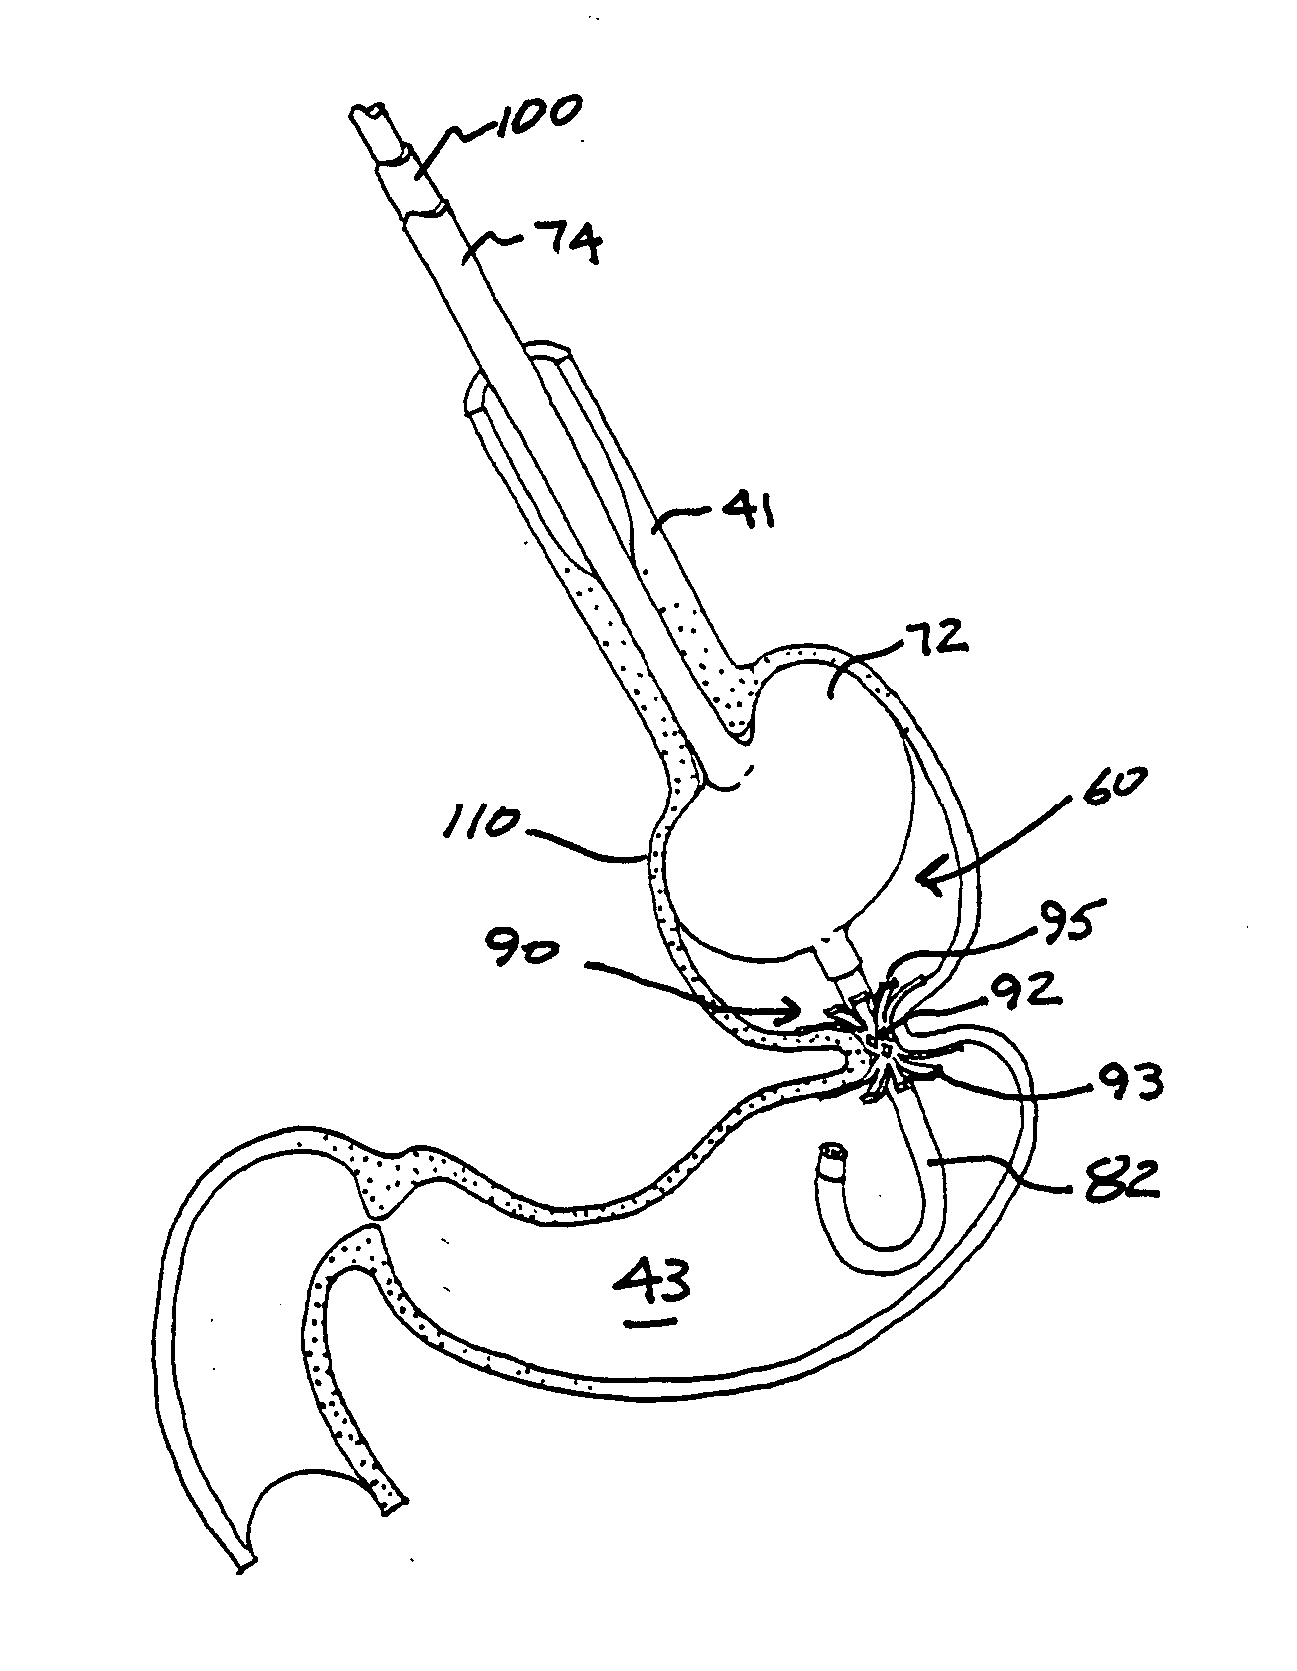 Transesophageal gastric reduction device, system and method